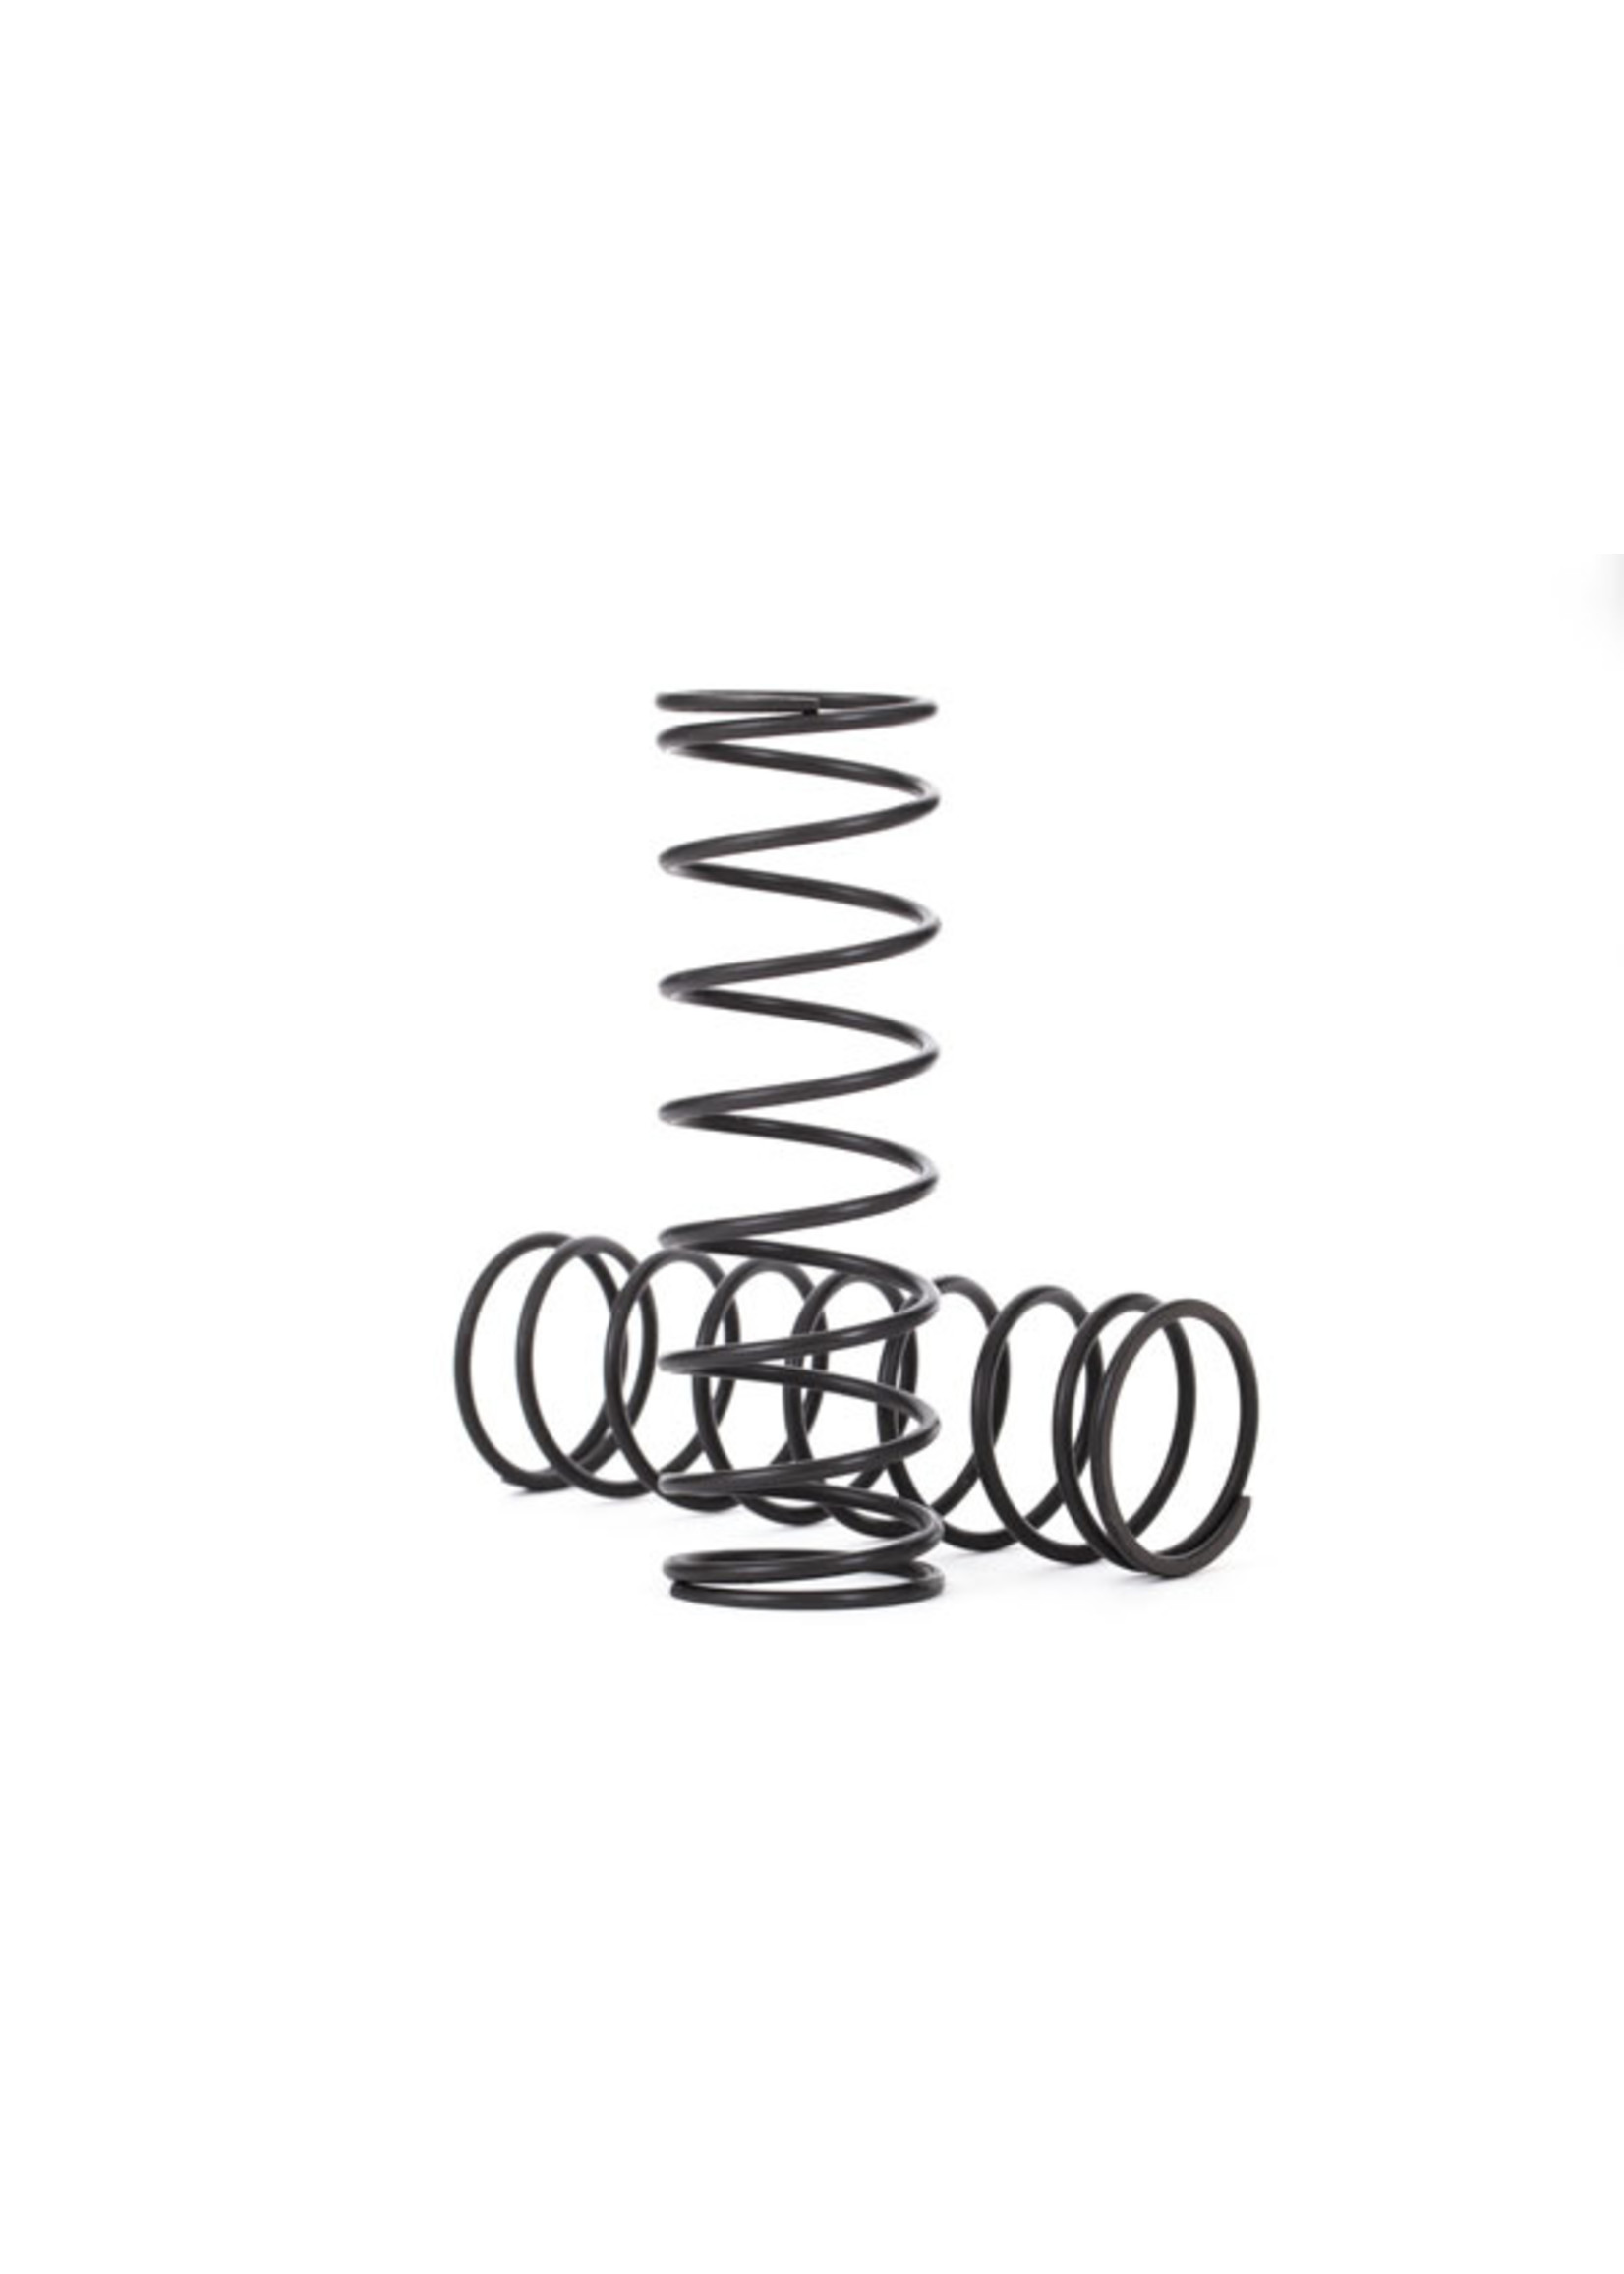 Traxxas 9659 - Shock Springs, 1.487 Rate (GT-Maxx) Natural Finish